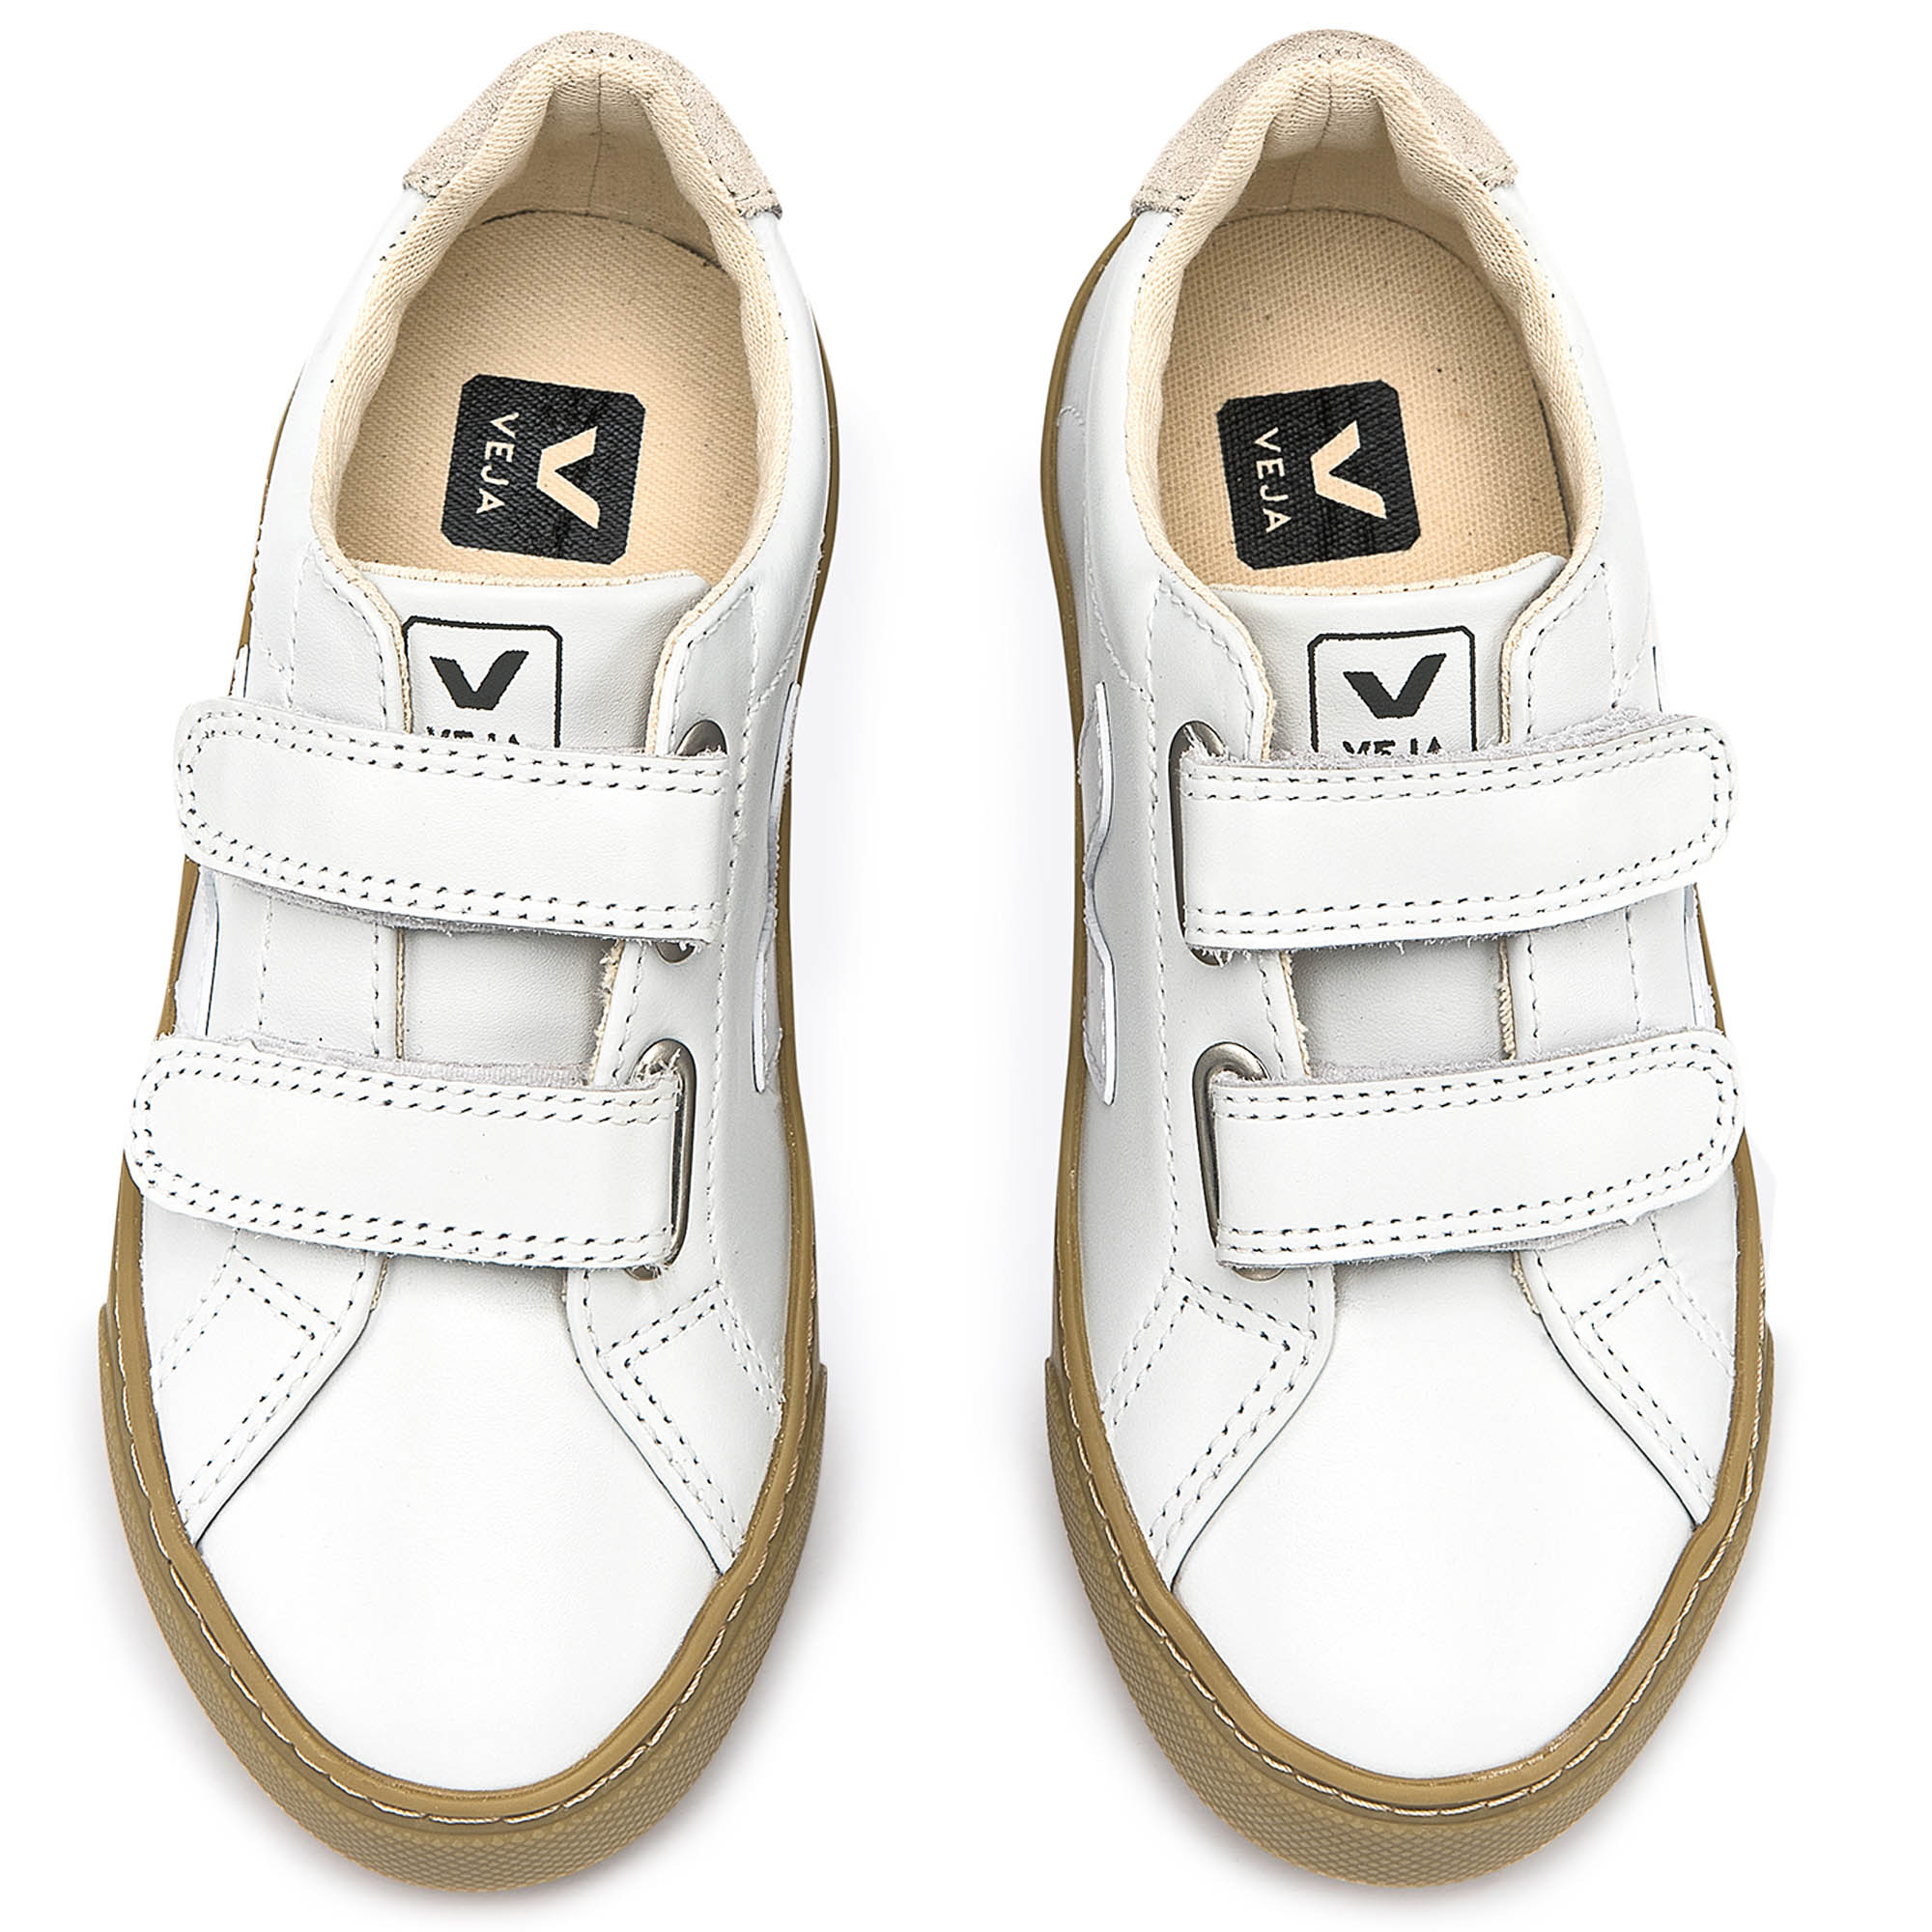 Bbay  Girls  White   Leather Velcro   With  White  "V" Shoes